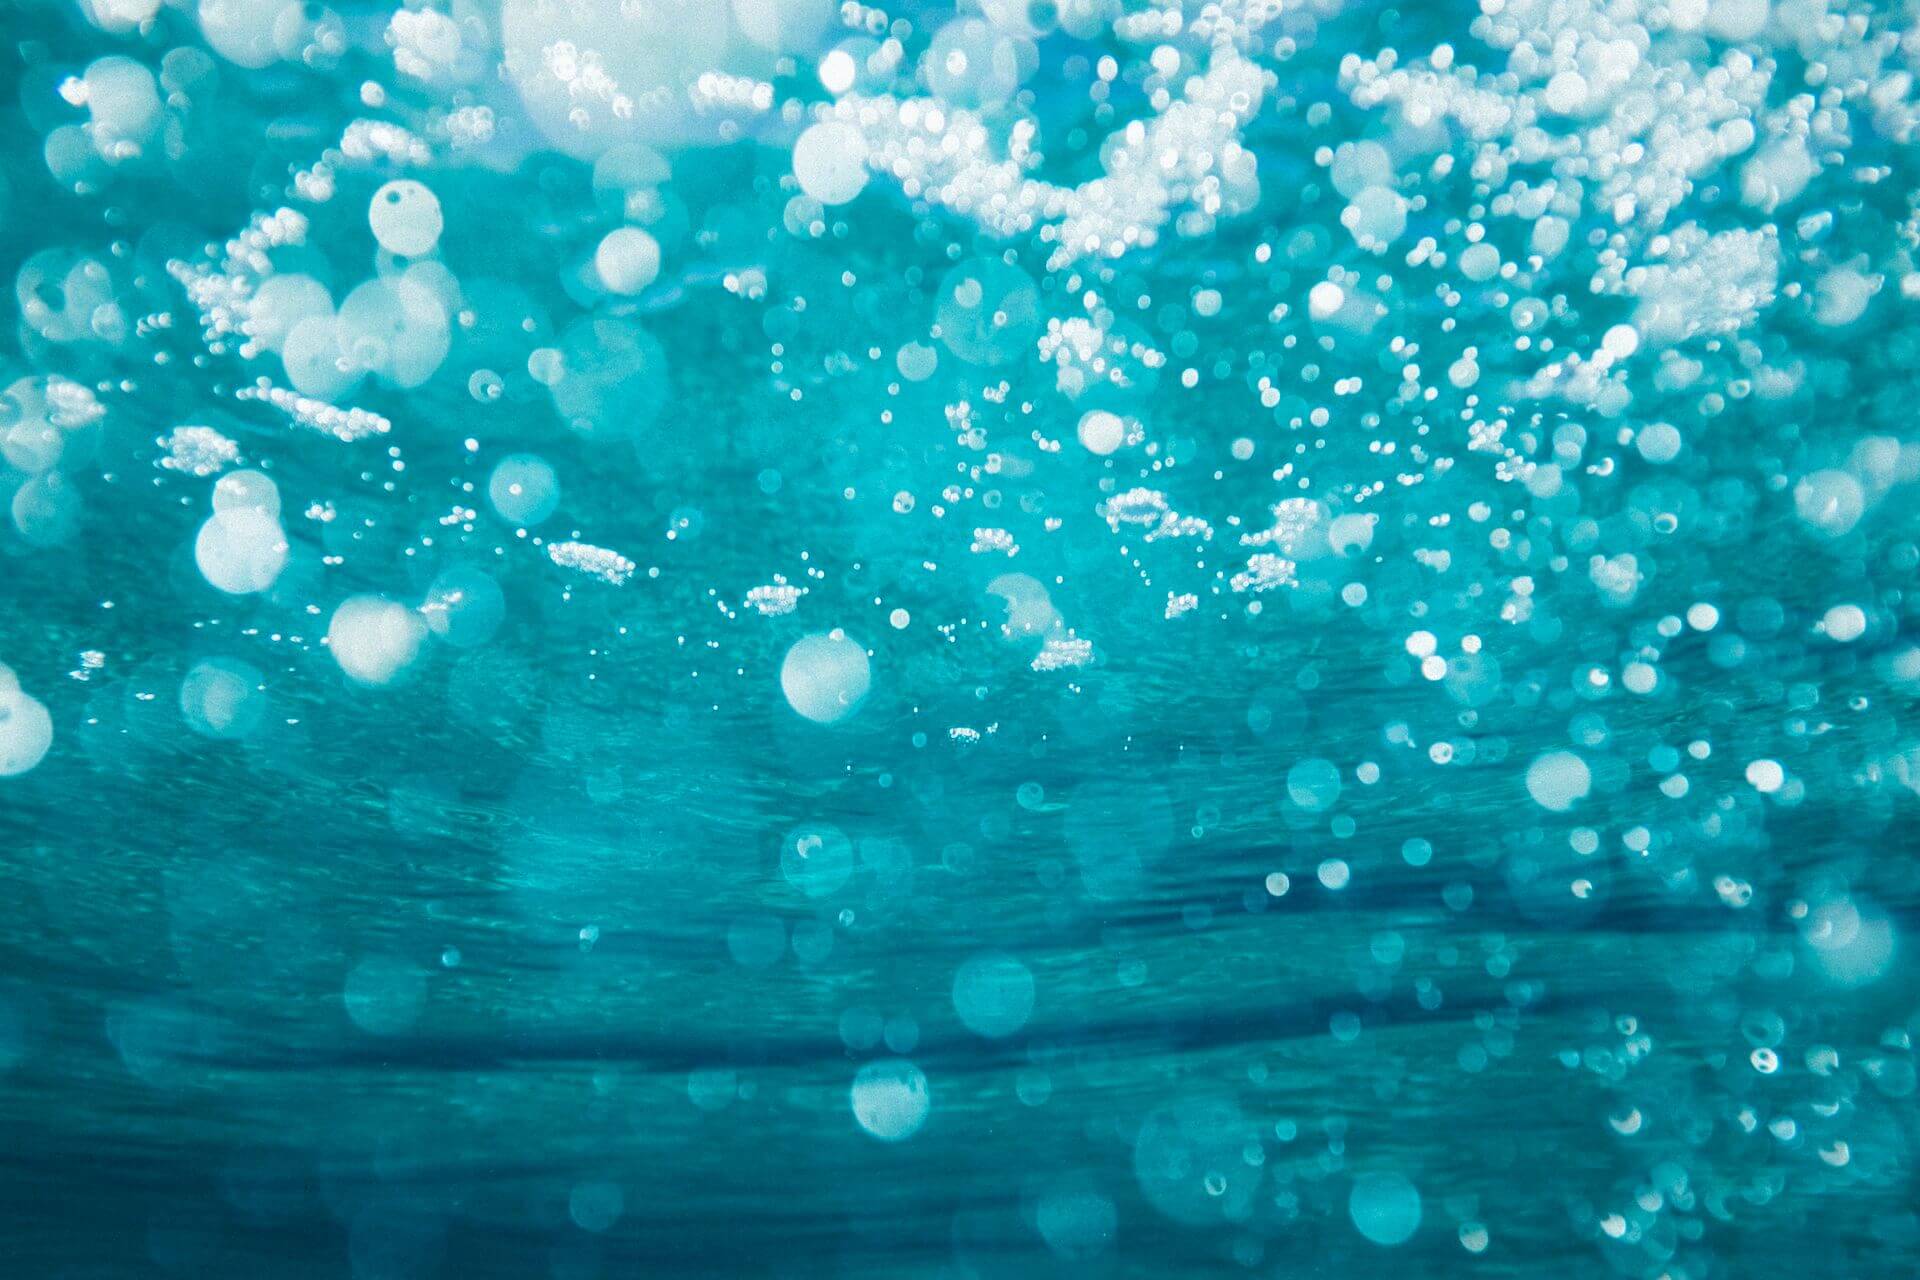 Water bubbles background